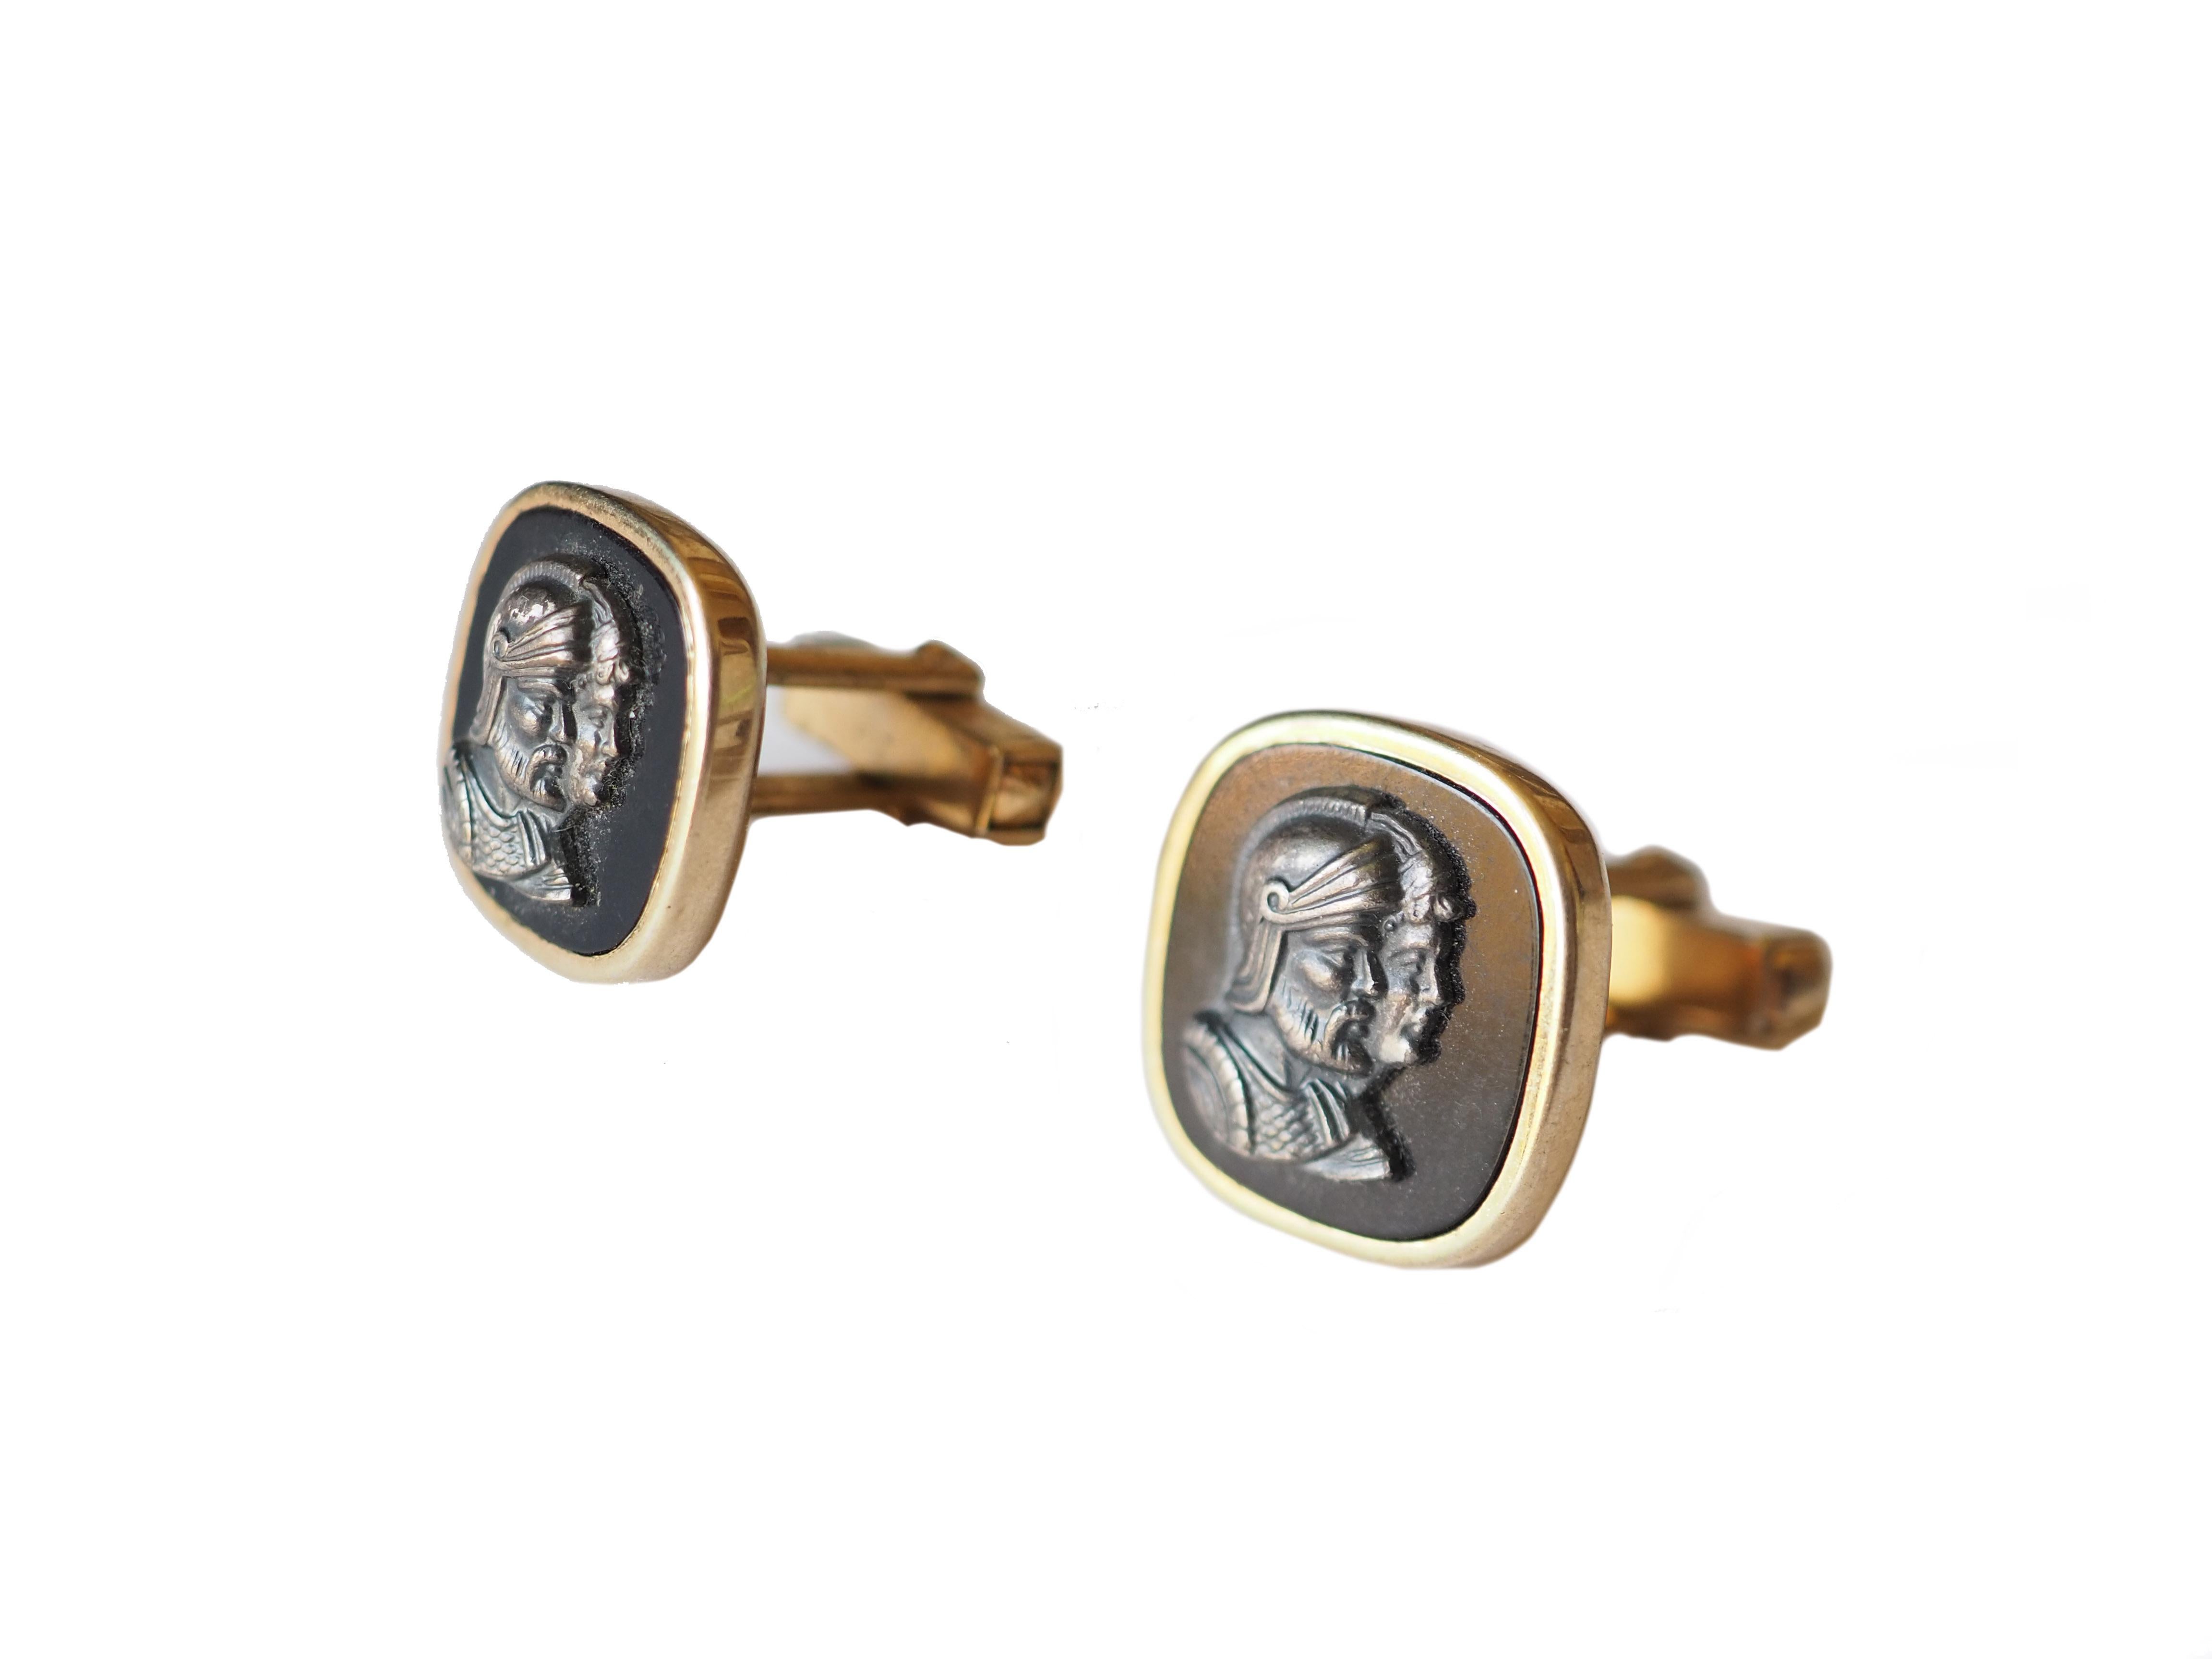 Carved Cameo Cufflinks glass paste gold plated. Measures 1x1 cm
All Giulia Colussi jewelry is new and has never been previously owned or worn. Each item will arrive at your door beautifully gift wrapped in our boxes, put inside an elegant pouch or